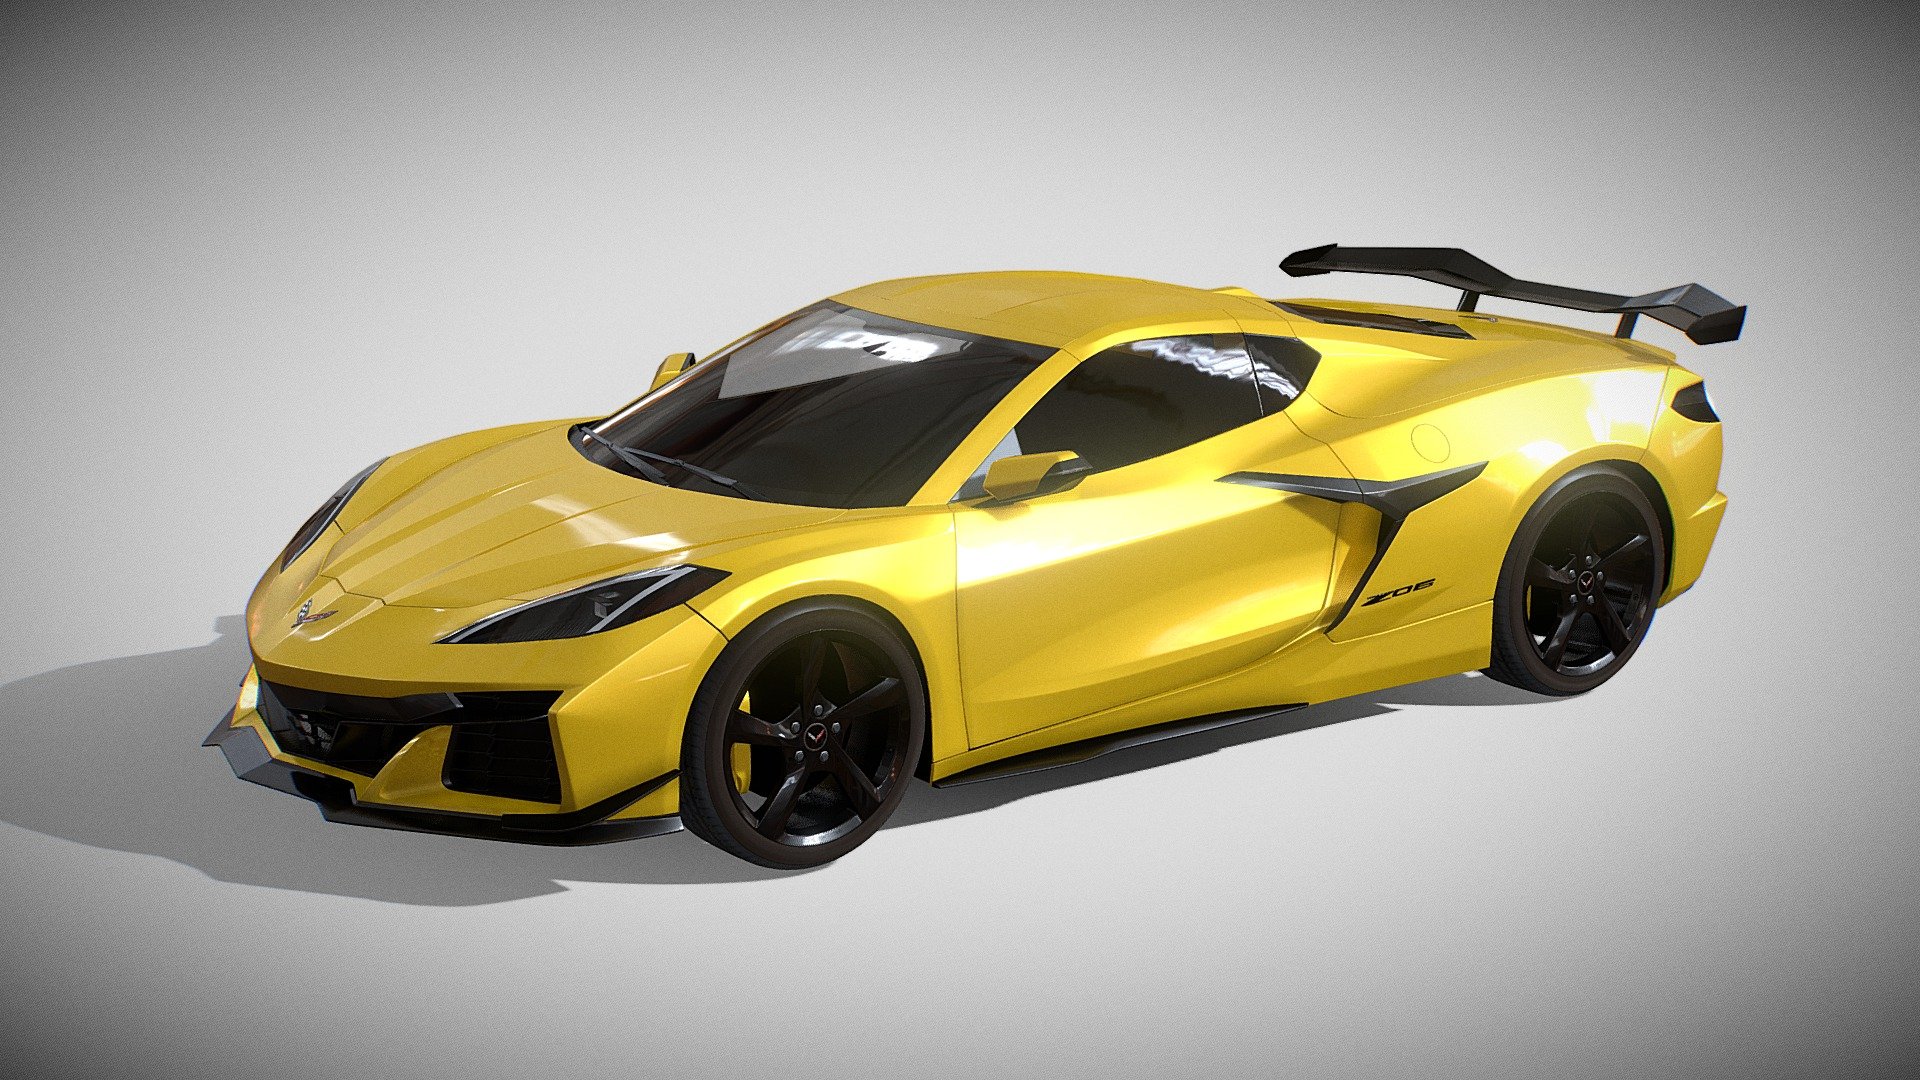 A high quality model of Chevrolet Corvette Z06 2023

Model is created in such way that every object has material’s name, you can easily change or apply materials.

Mesh is subdividable ( If needed )

Specs: All the textures are in jpg format and UVW wrapped. Model is fully textured with based on real object. All textures and materials are included and mapped in every format. Model does not include any backgrounds or scenes used in preview images.

This model is high quality, photo realalistic. The model has a fully textured, detailed design that allows for close-up renders, and was originally modeled and Textured in Blender. Fidelity is optimal up to a 4k render

IF THERE IS ANY ISSUE REGARDING THE MODEL FEEL FREE TO DROP A COMMENT .

let us know if you liked the model give a like and comment 3d model